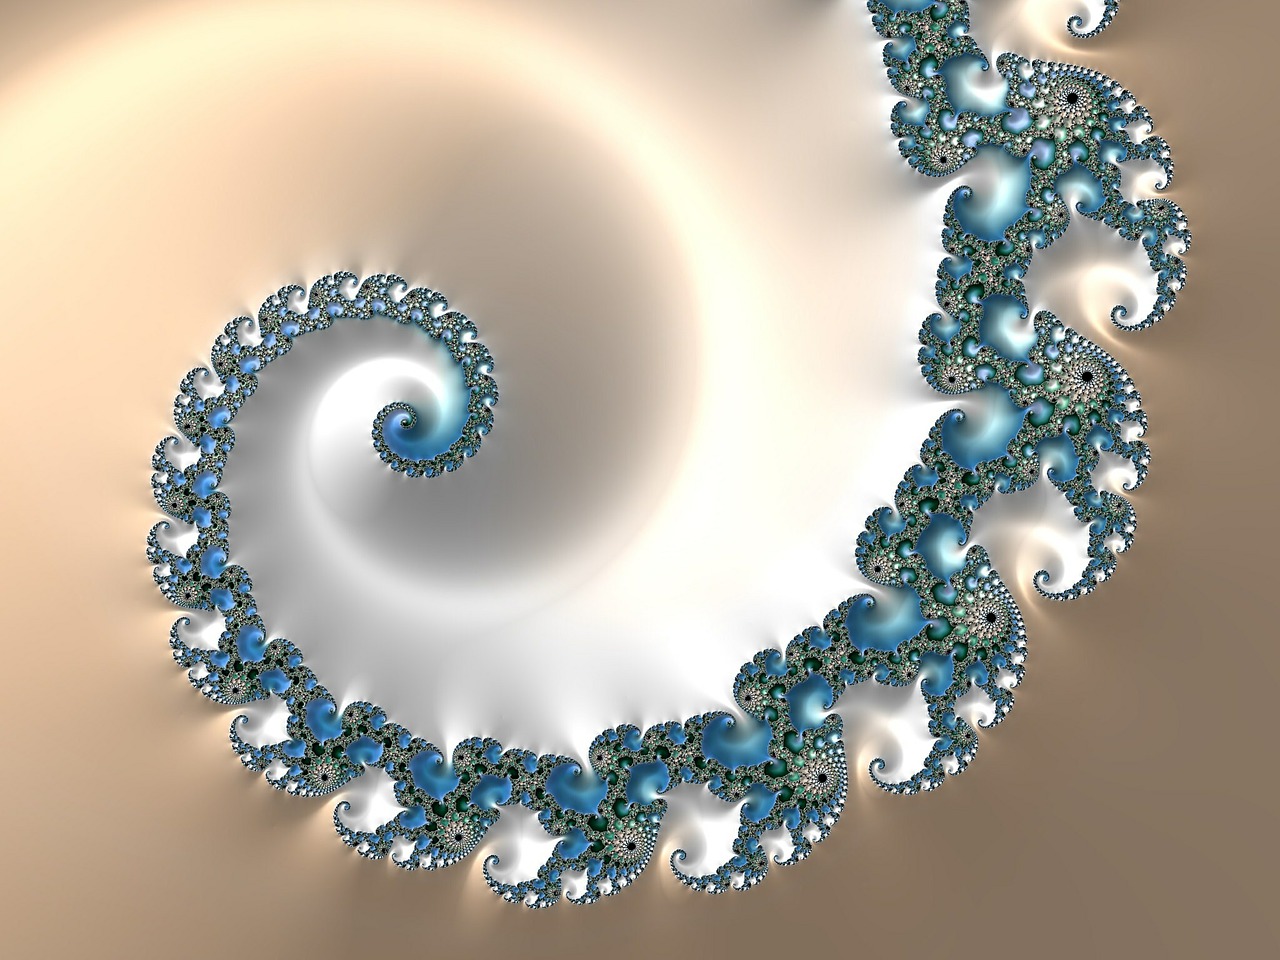 fractal abstract mathematical free photo